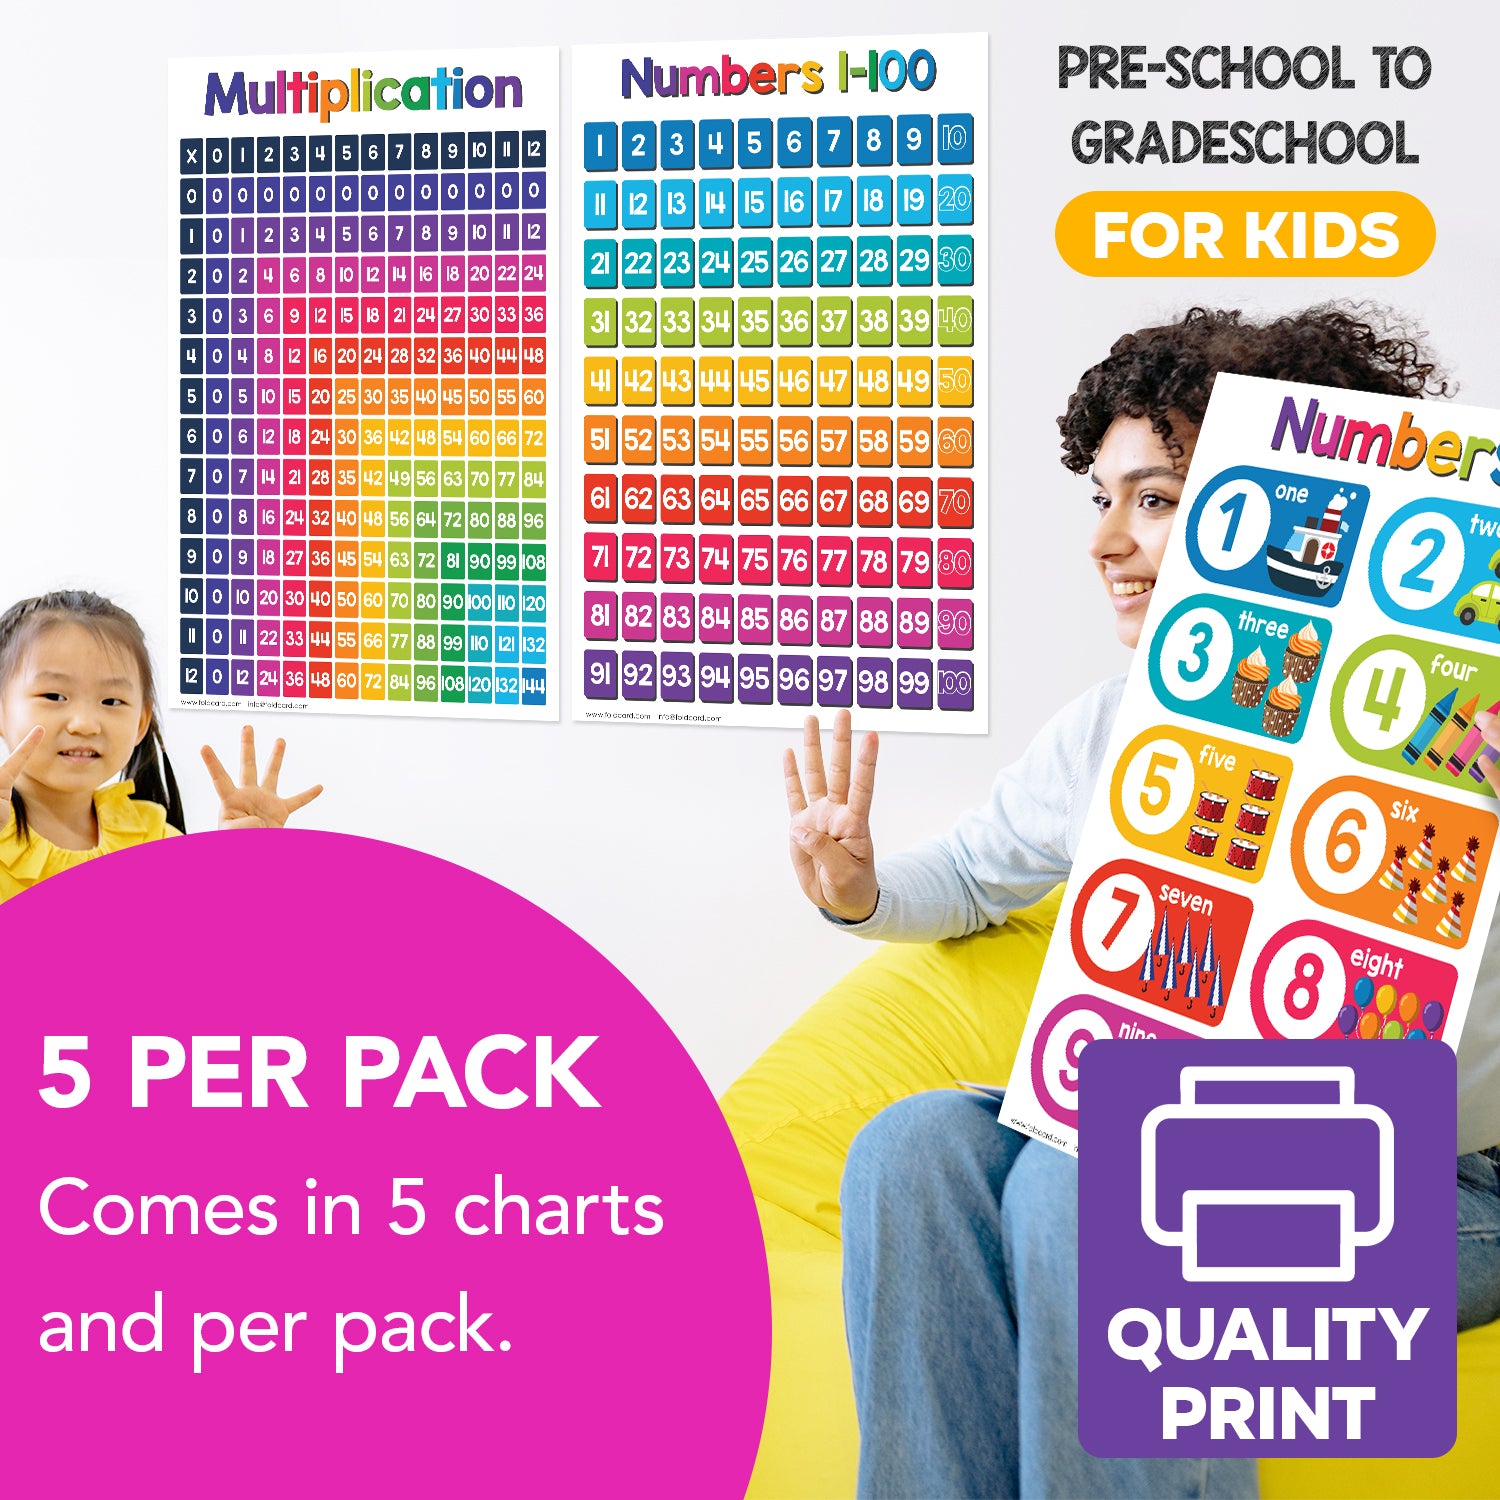 Multiplication Chart Math Table Poster - 11" x 17" Educational Visual for Learning | 5-Pack